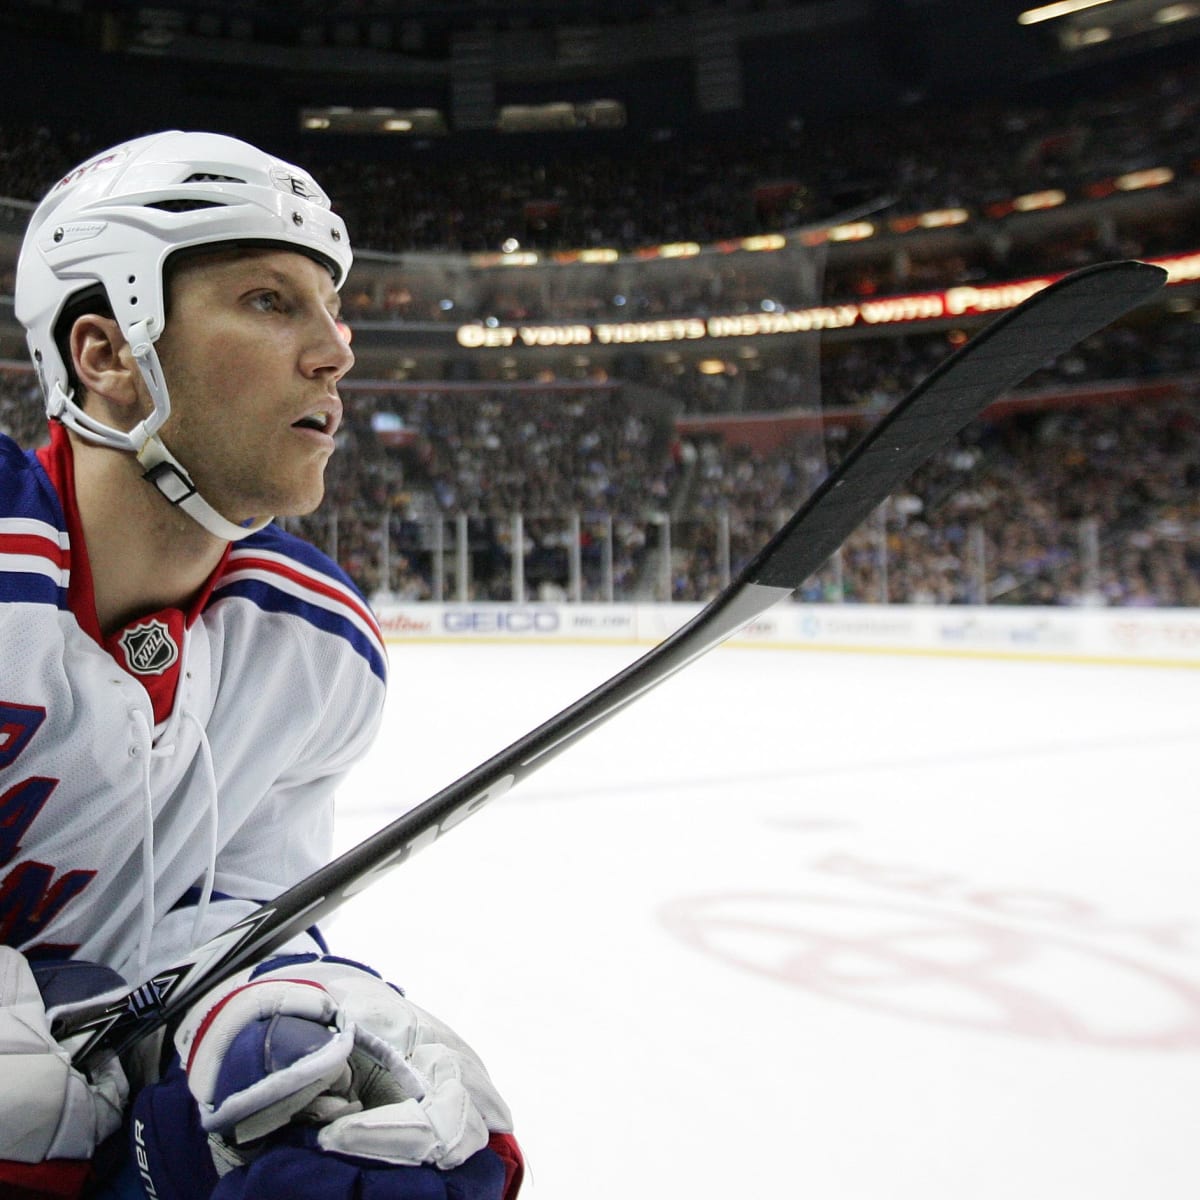 Daily Buzz: Is former NHL star Sean Avery joining 'Dancing With the Stars'?